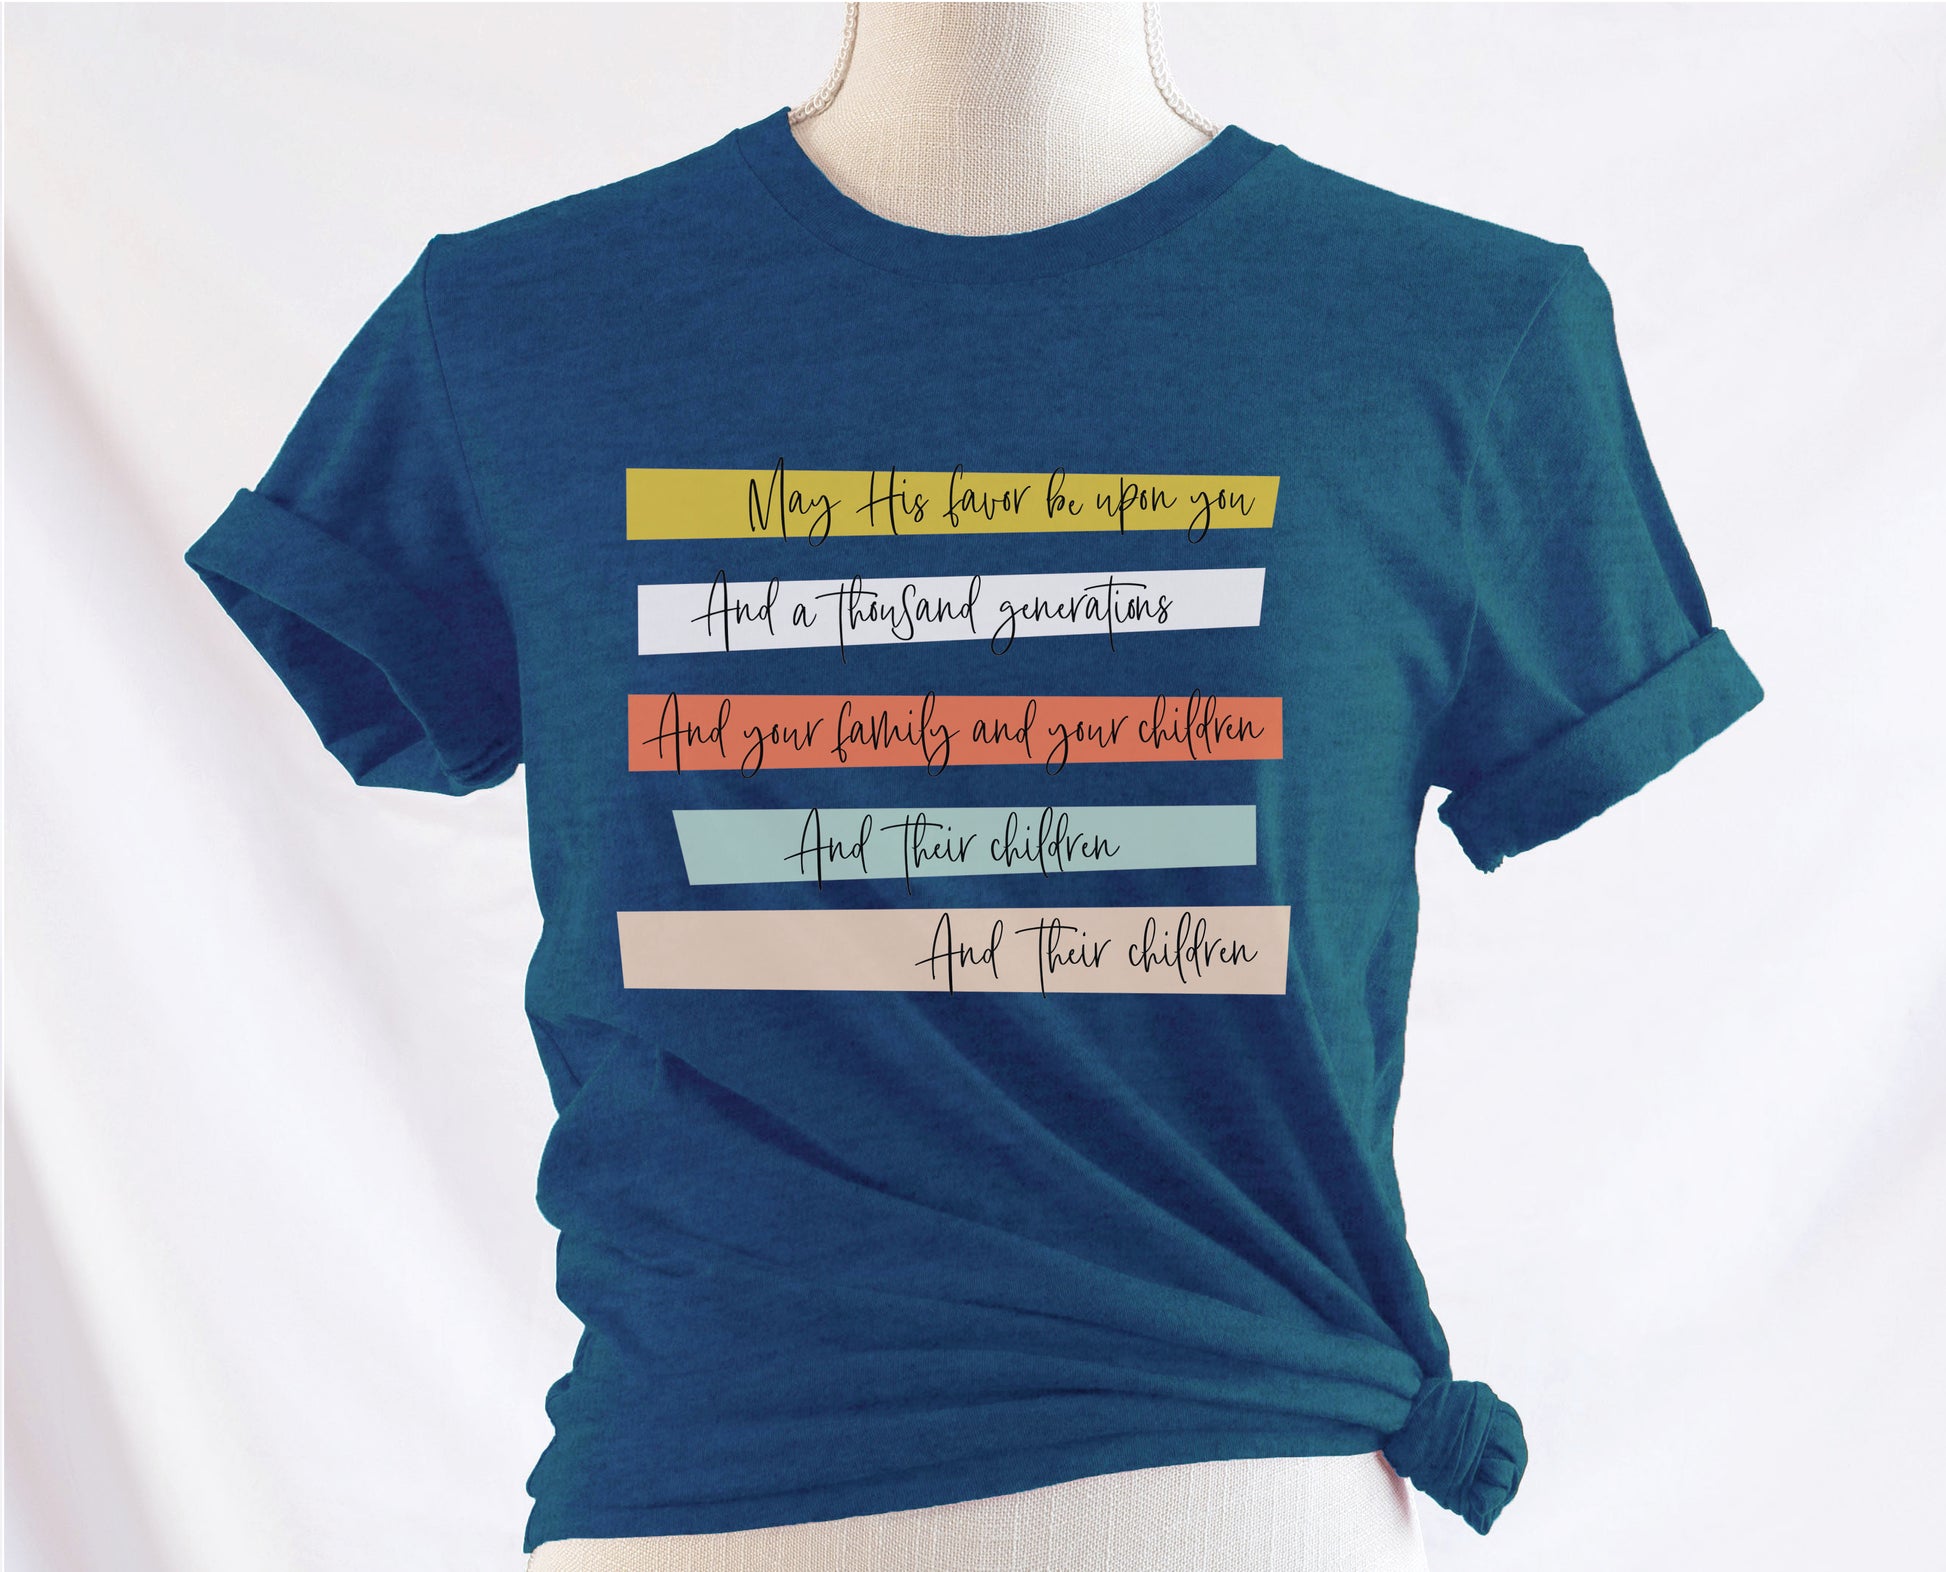 May His Favor Be Upon You and a thousand generations The Family and children Blessing Christian aesthetic 5 bars design printed on soft heather deep teal t-shirt for women